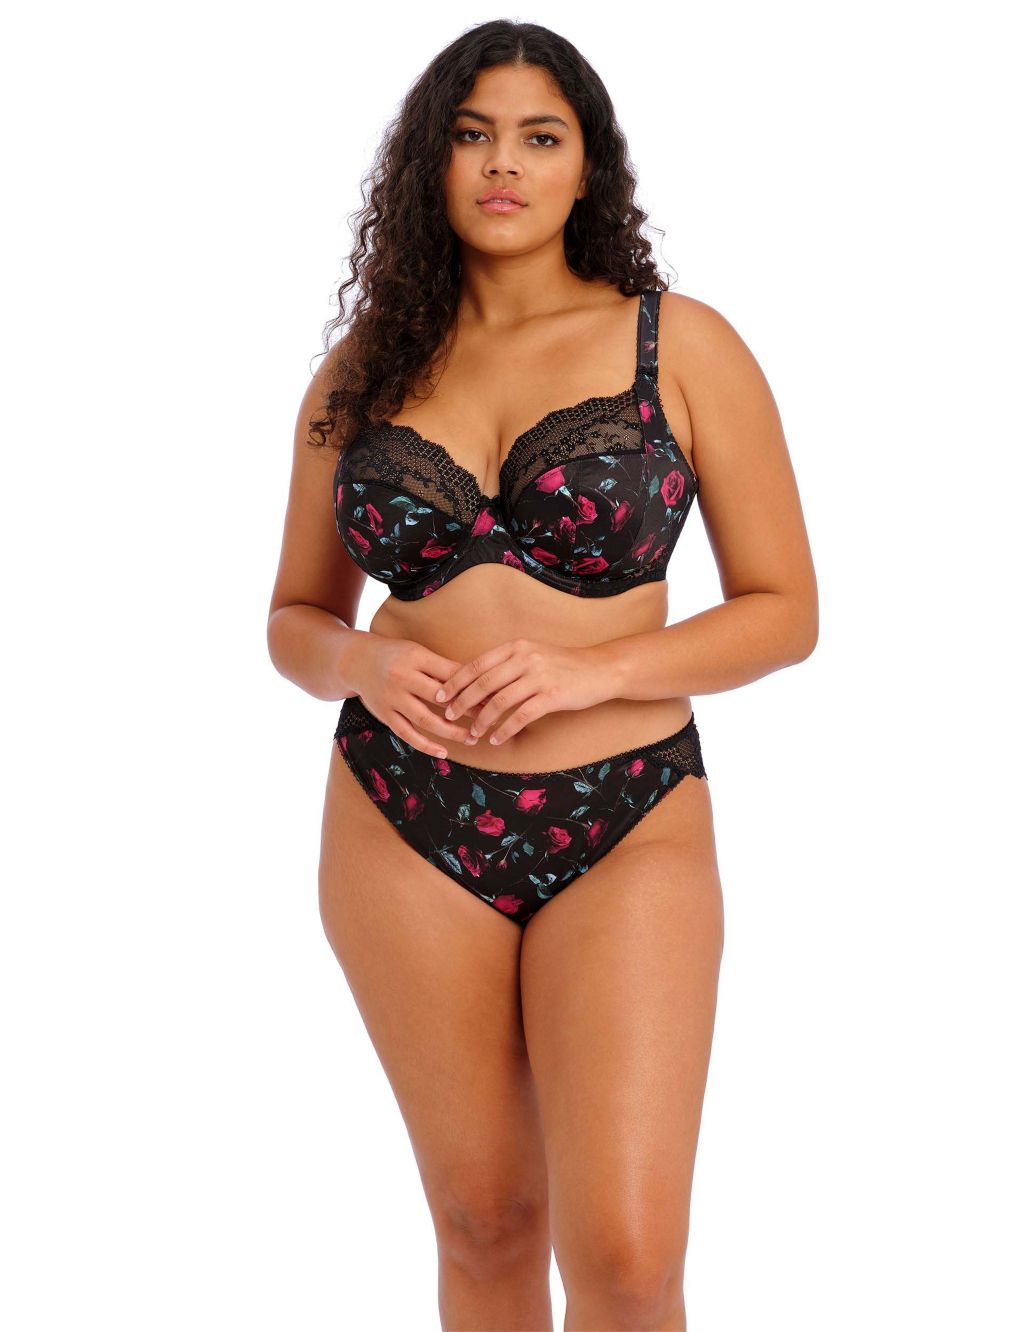 Lucie Floral Brazilian Knickers image 5